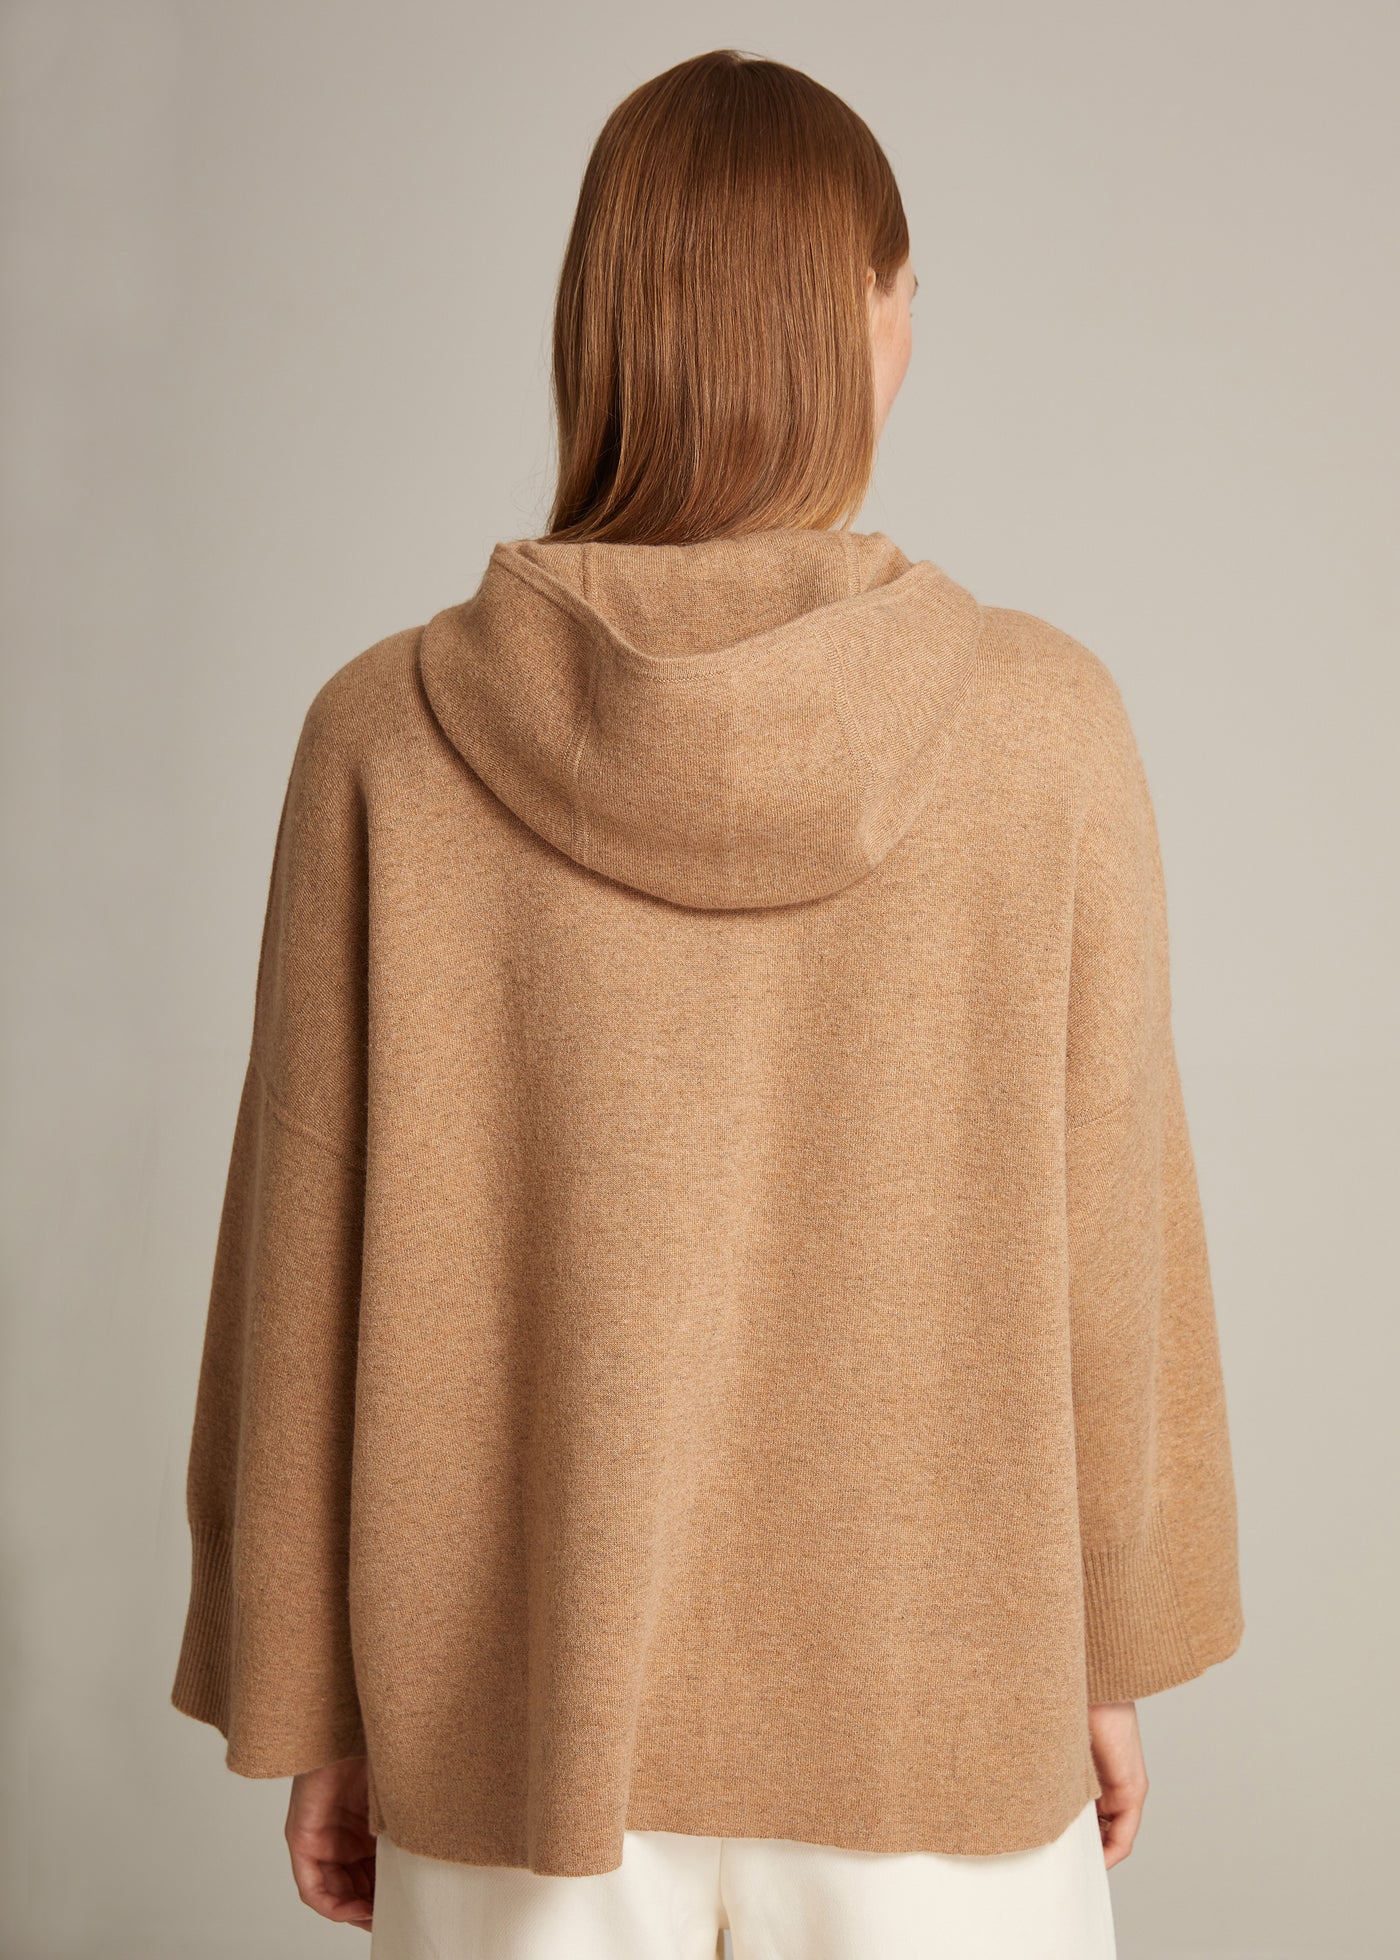 Women's Pure Cashmere Hooded Top